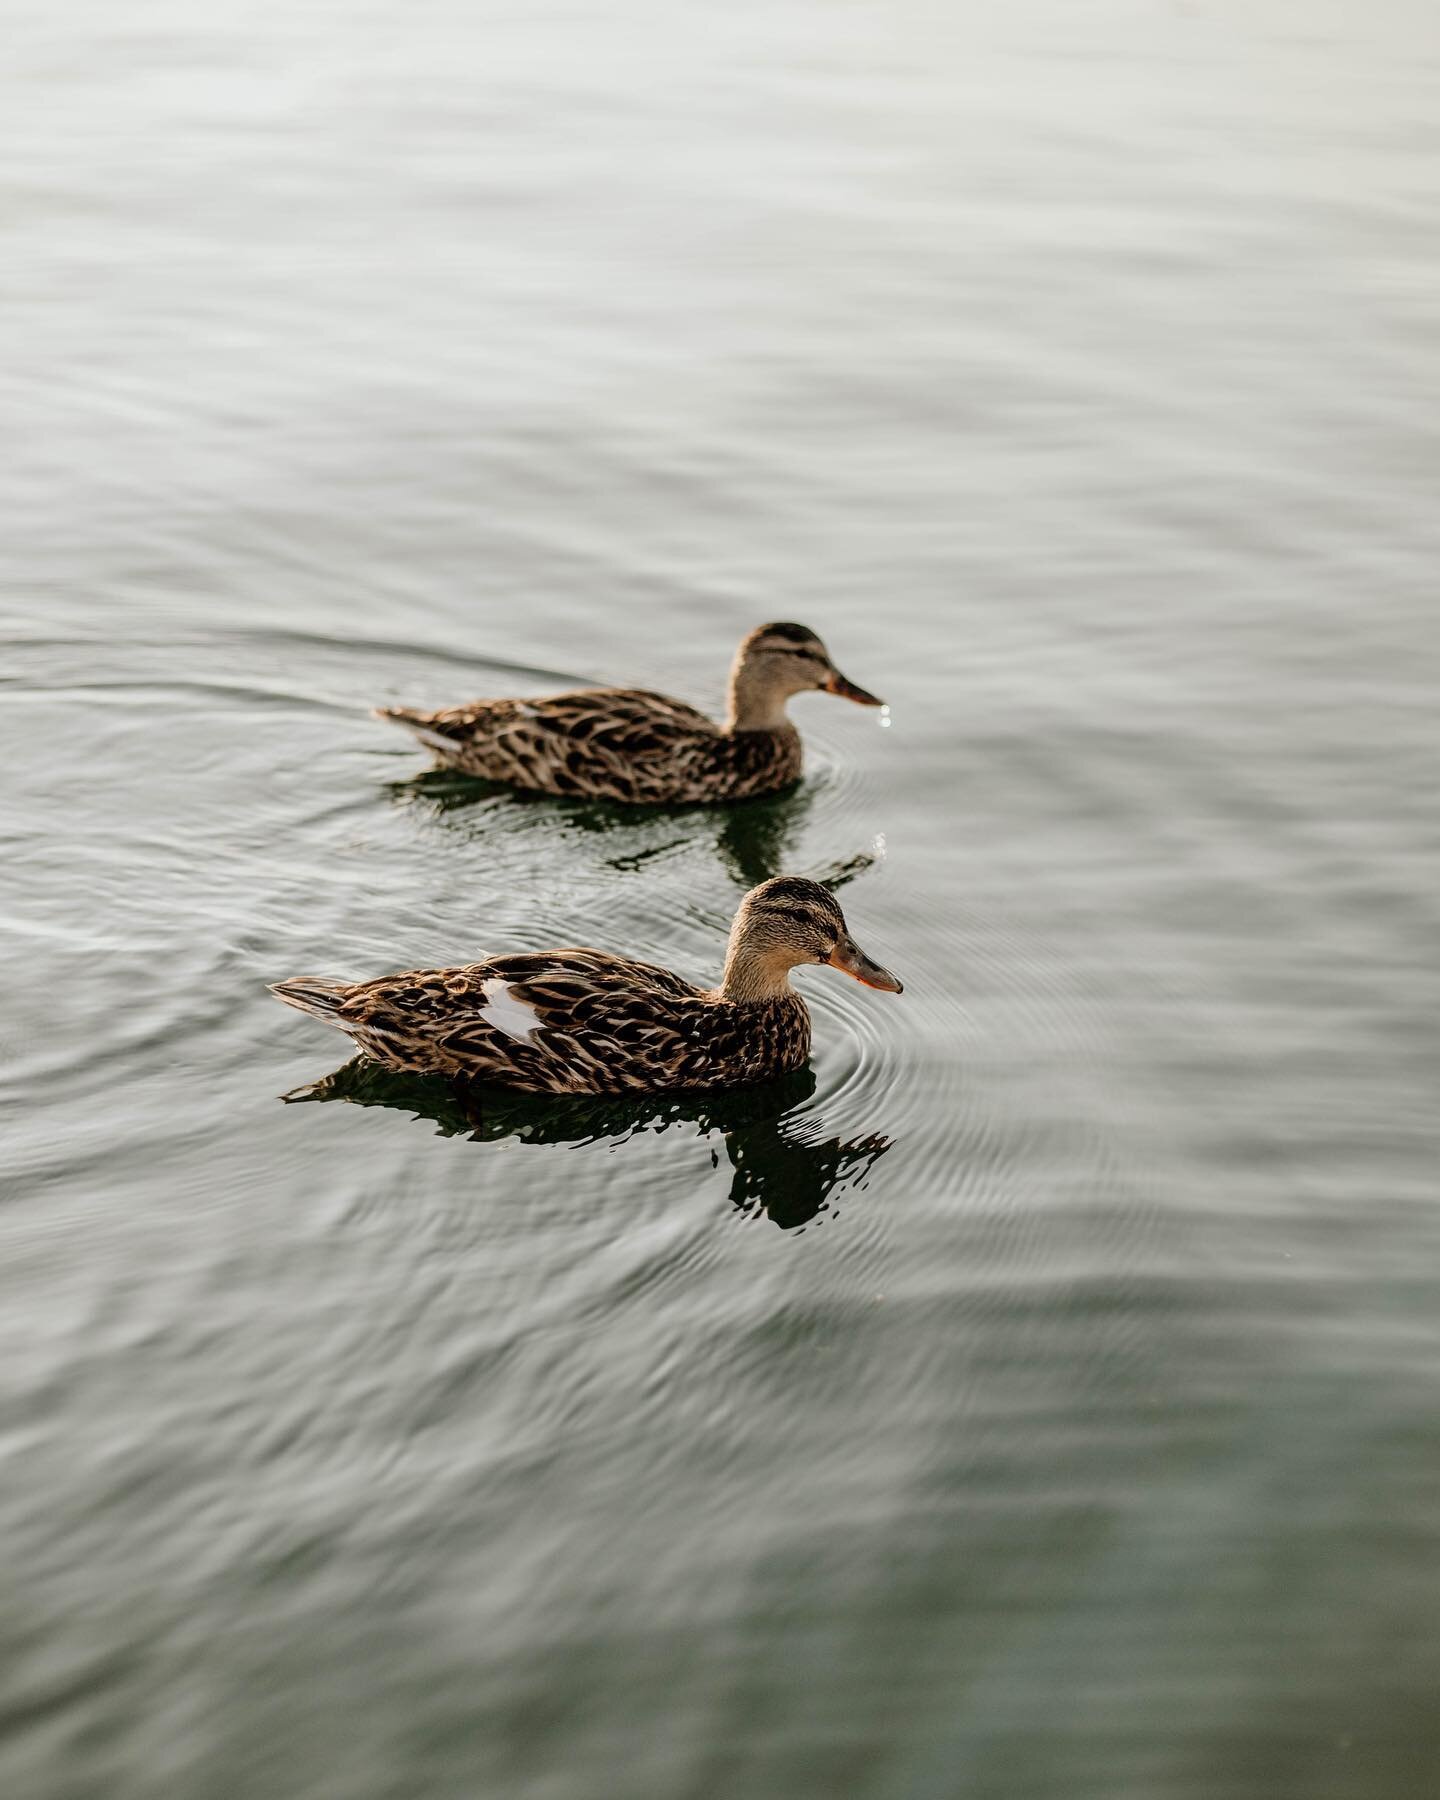 a capture from last summer &mdash; warm sun, rippling water and these cute little ducks floating along 🦆🤍